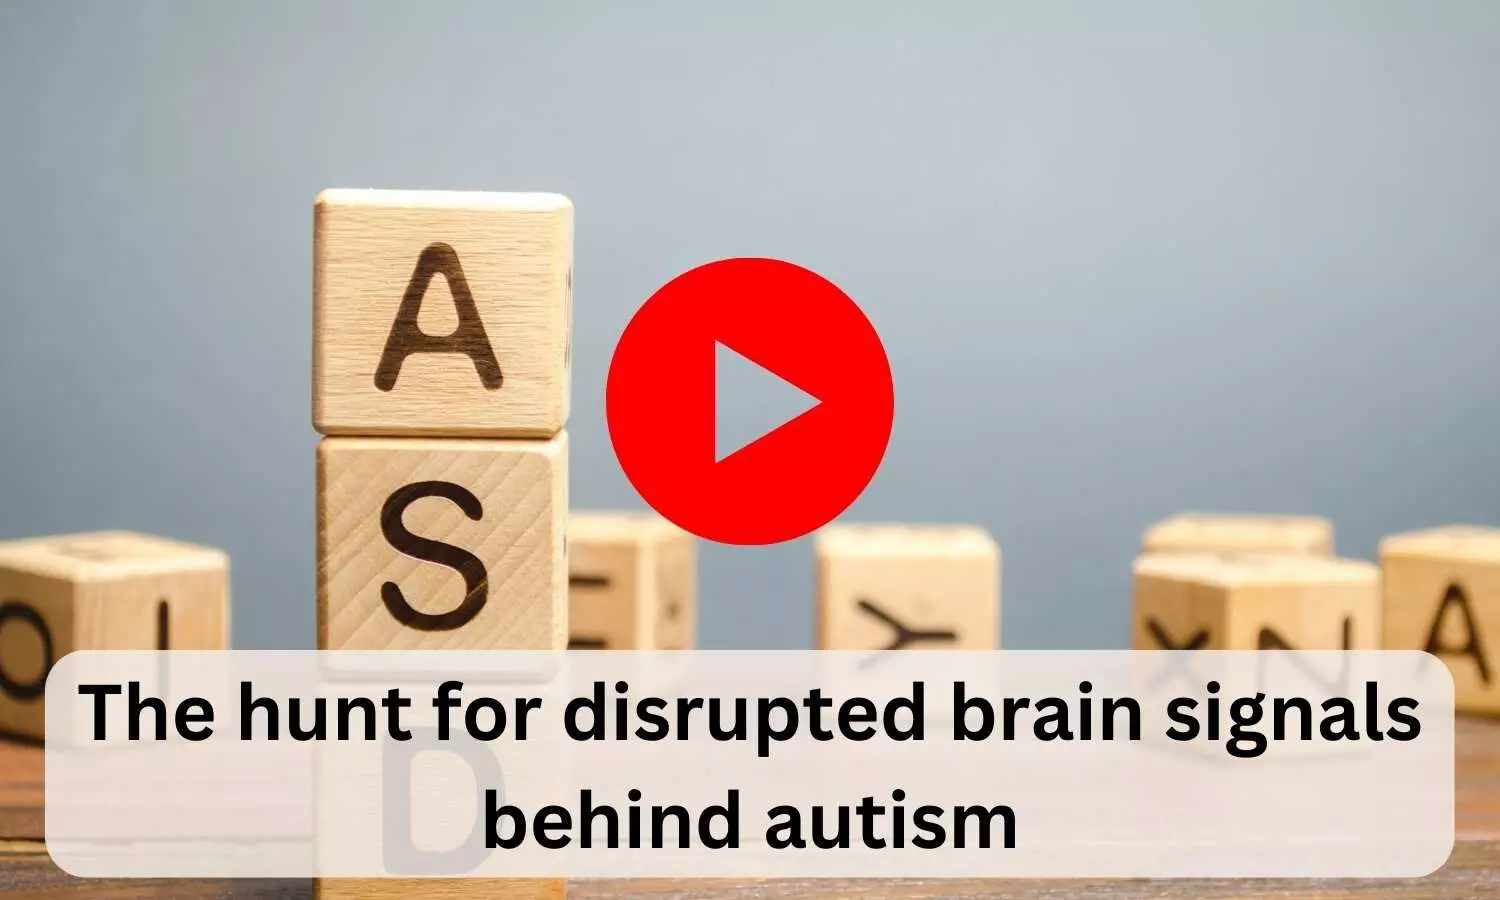 The hunt for disrupted brain signals behind autism